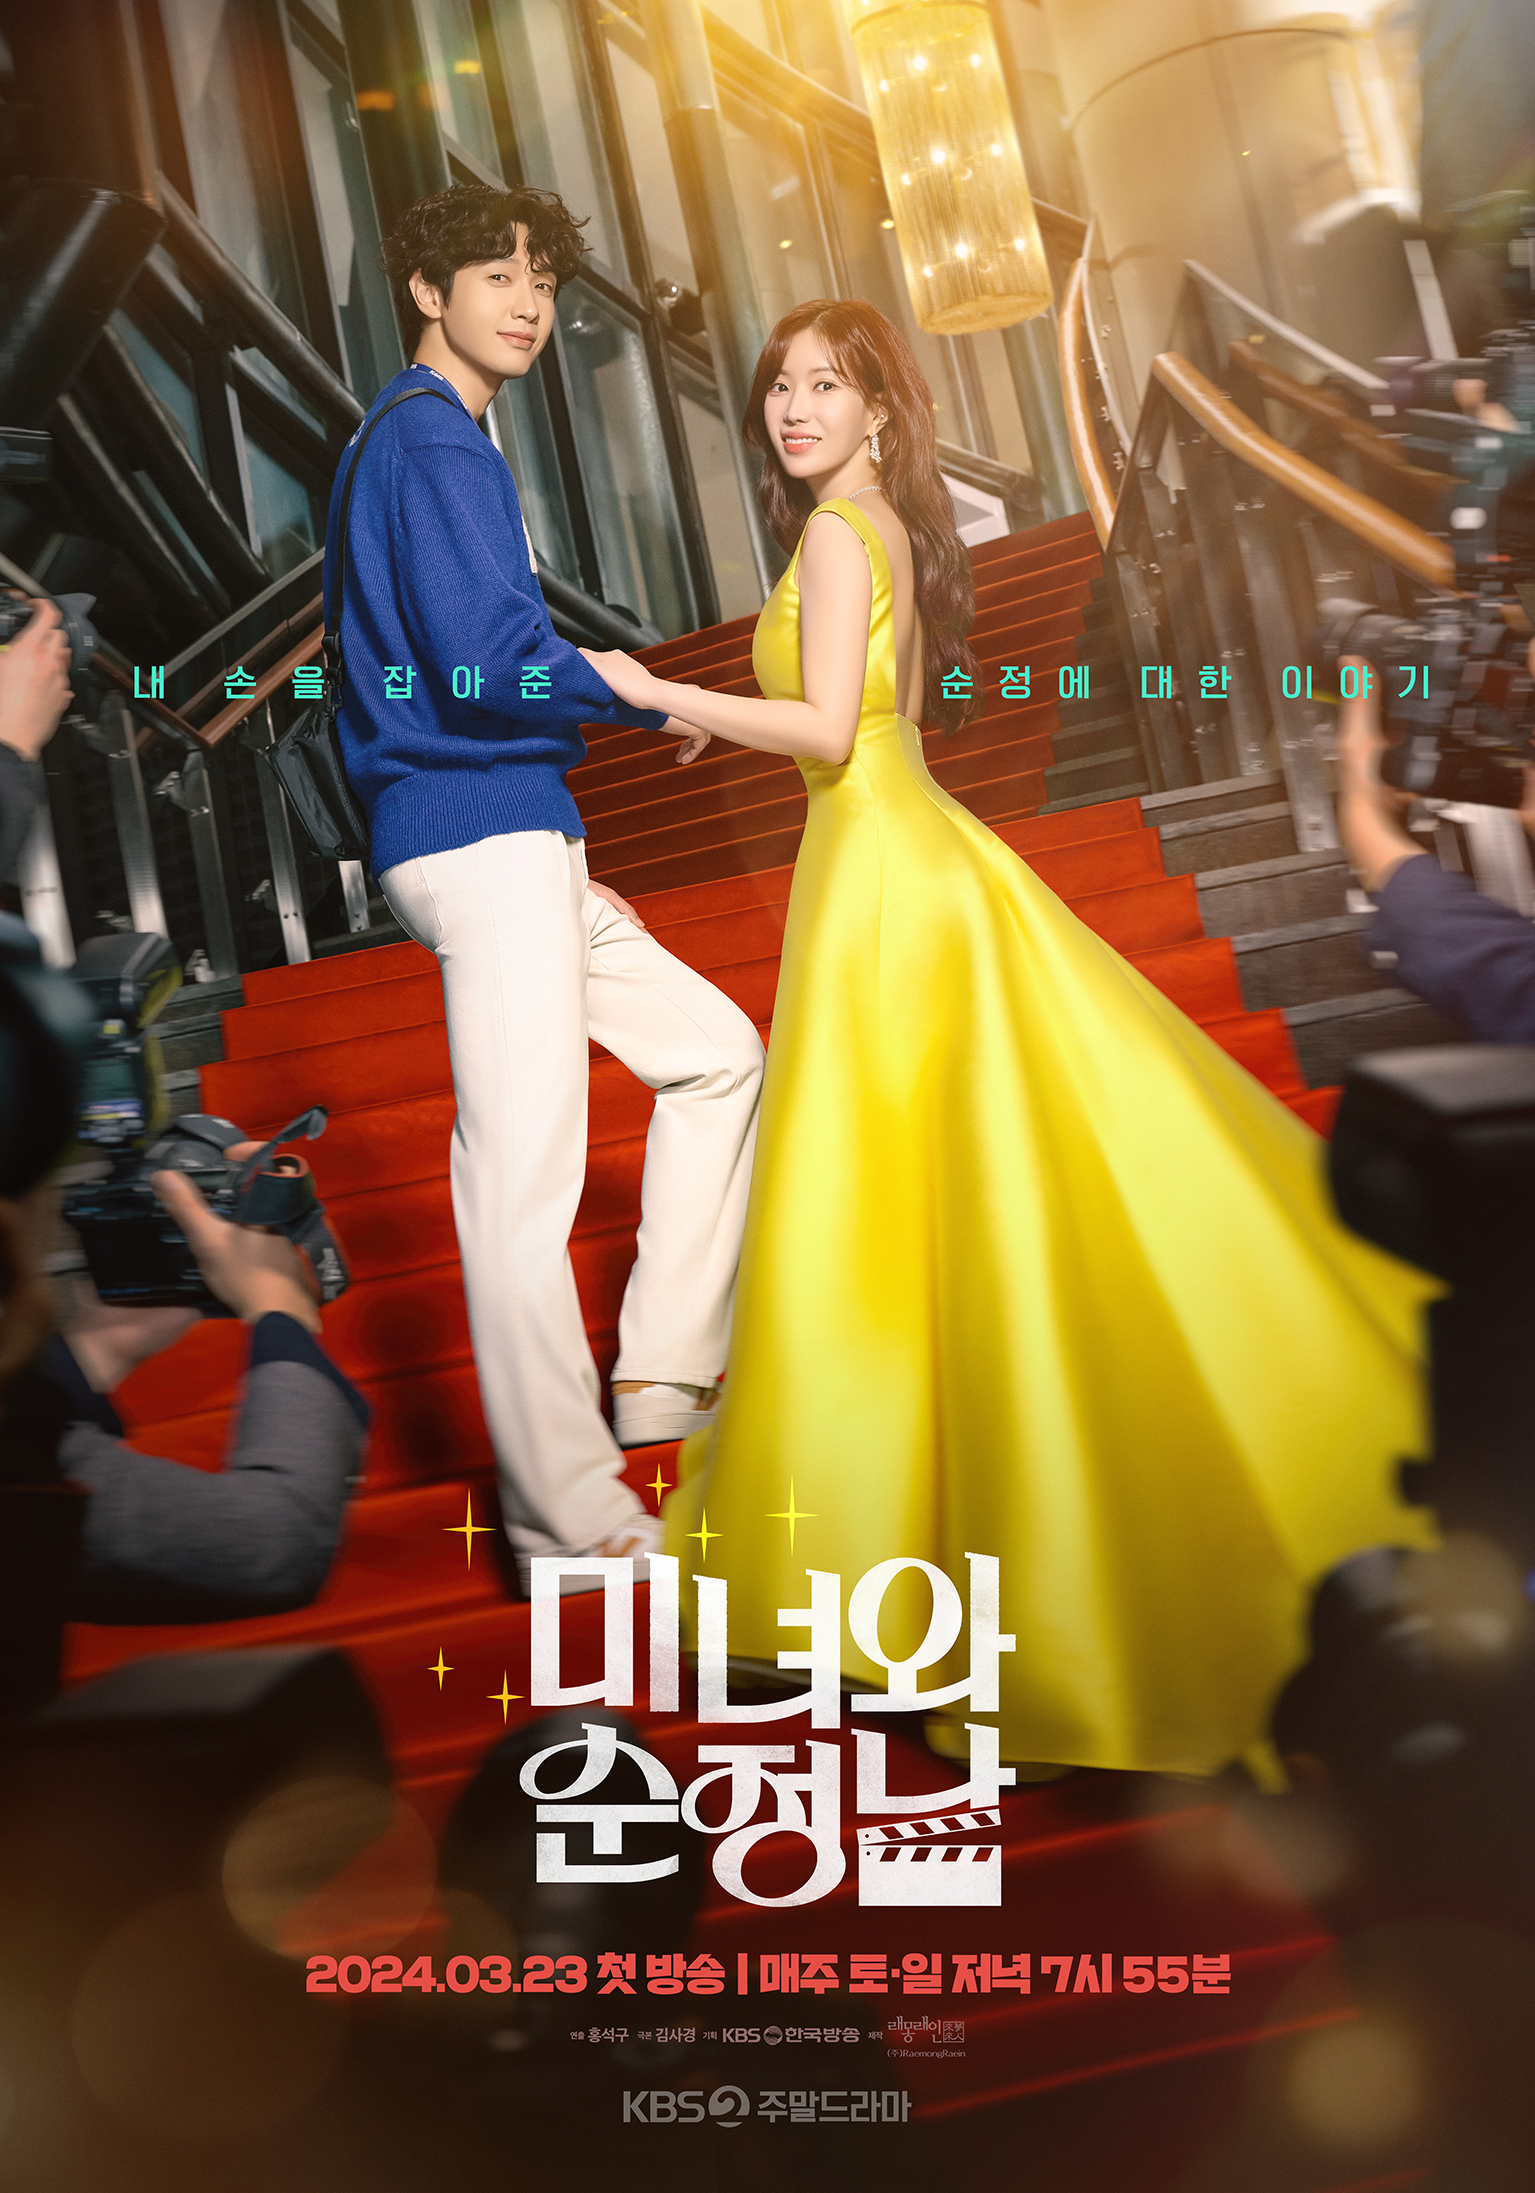 Ji Hyun Woo Escorts Im Soo Hyang On The Red Carpet In “Beauty And Mr. Romantic” Poster